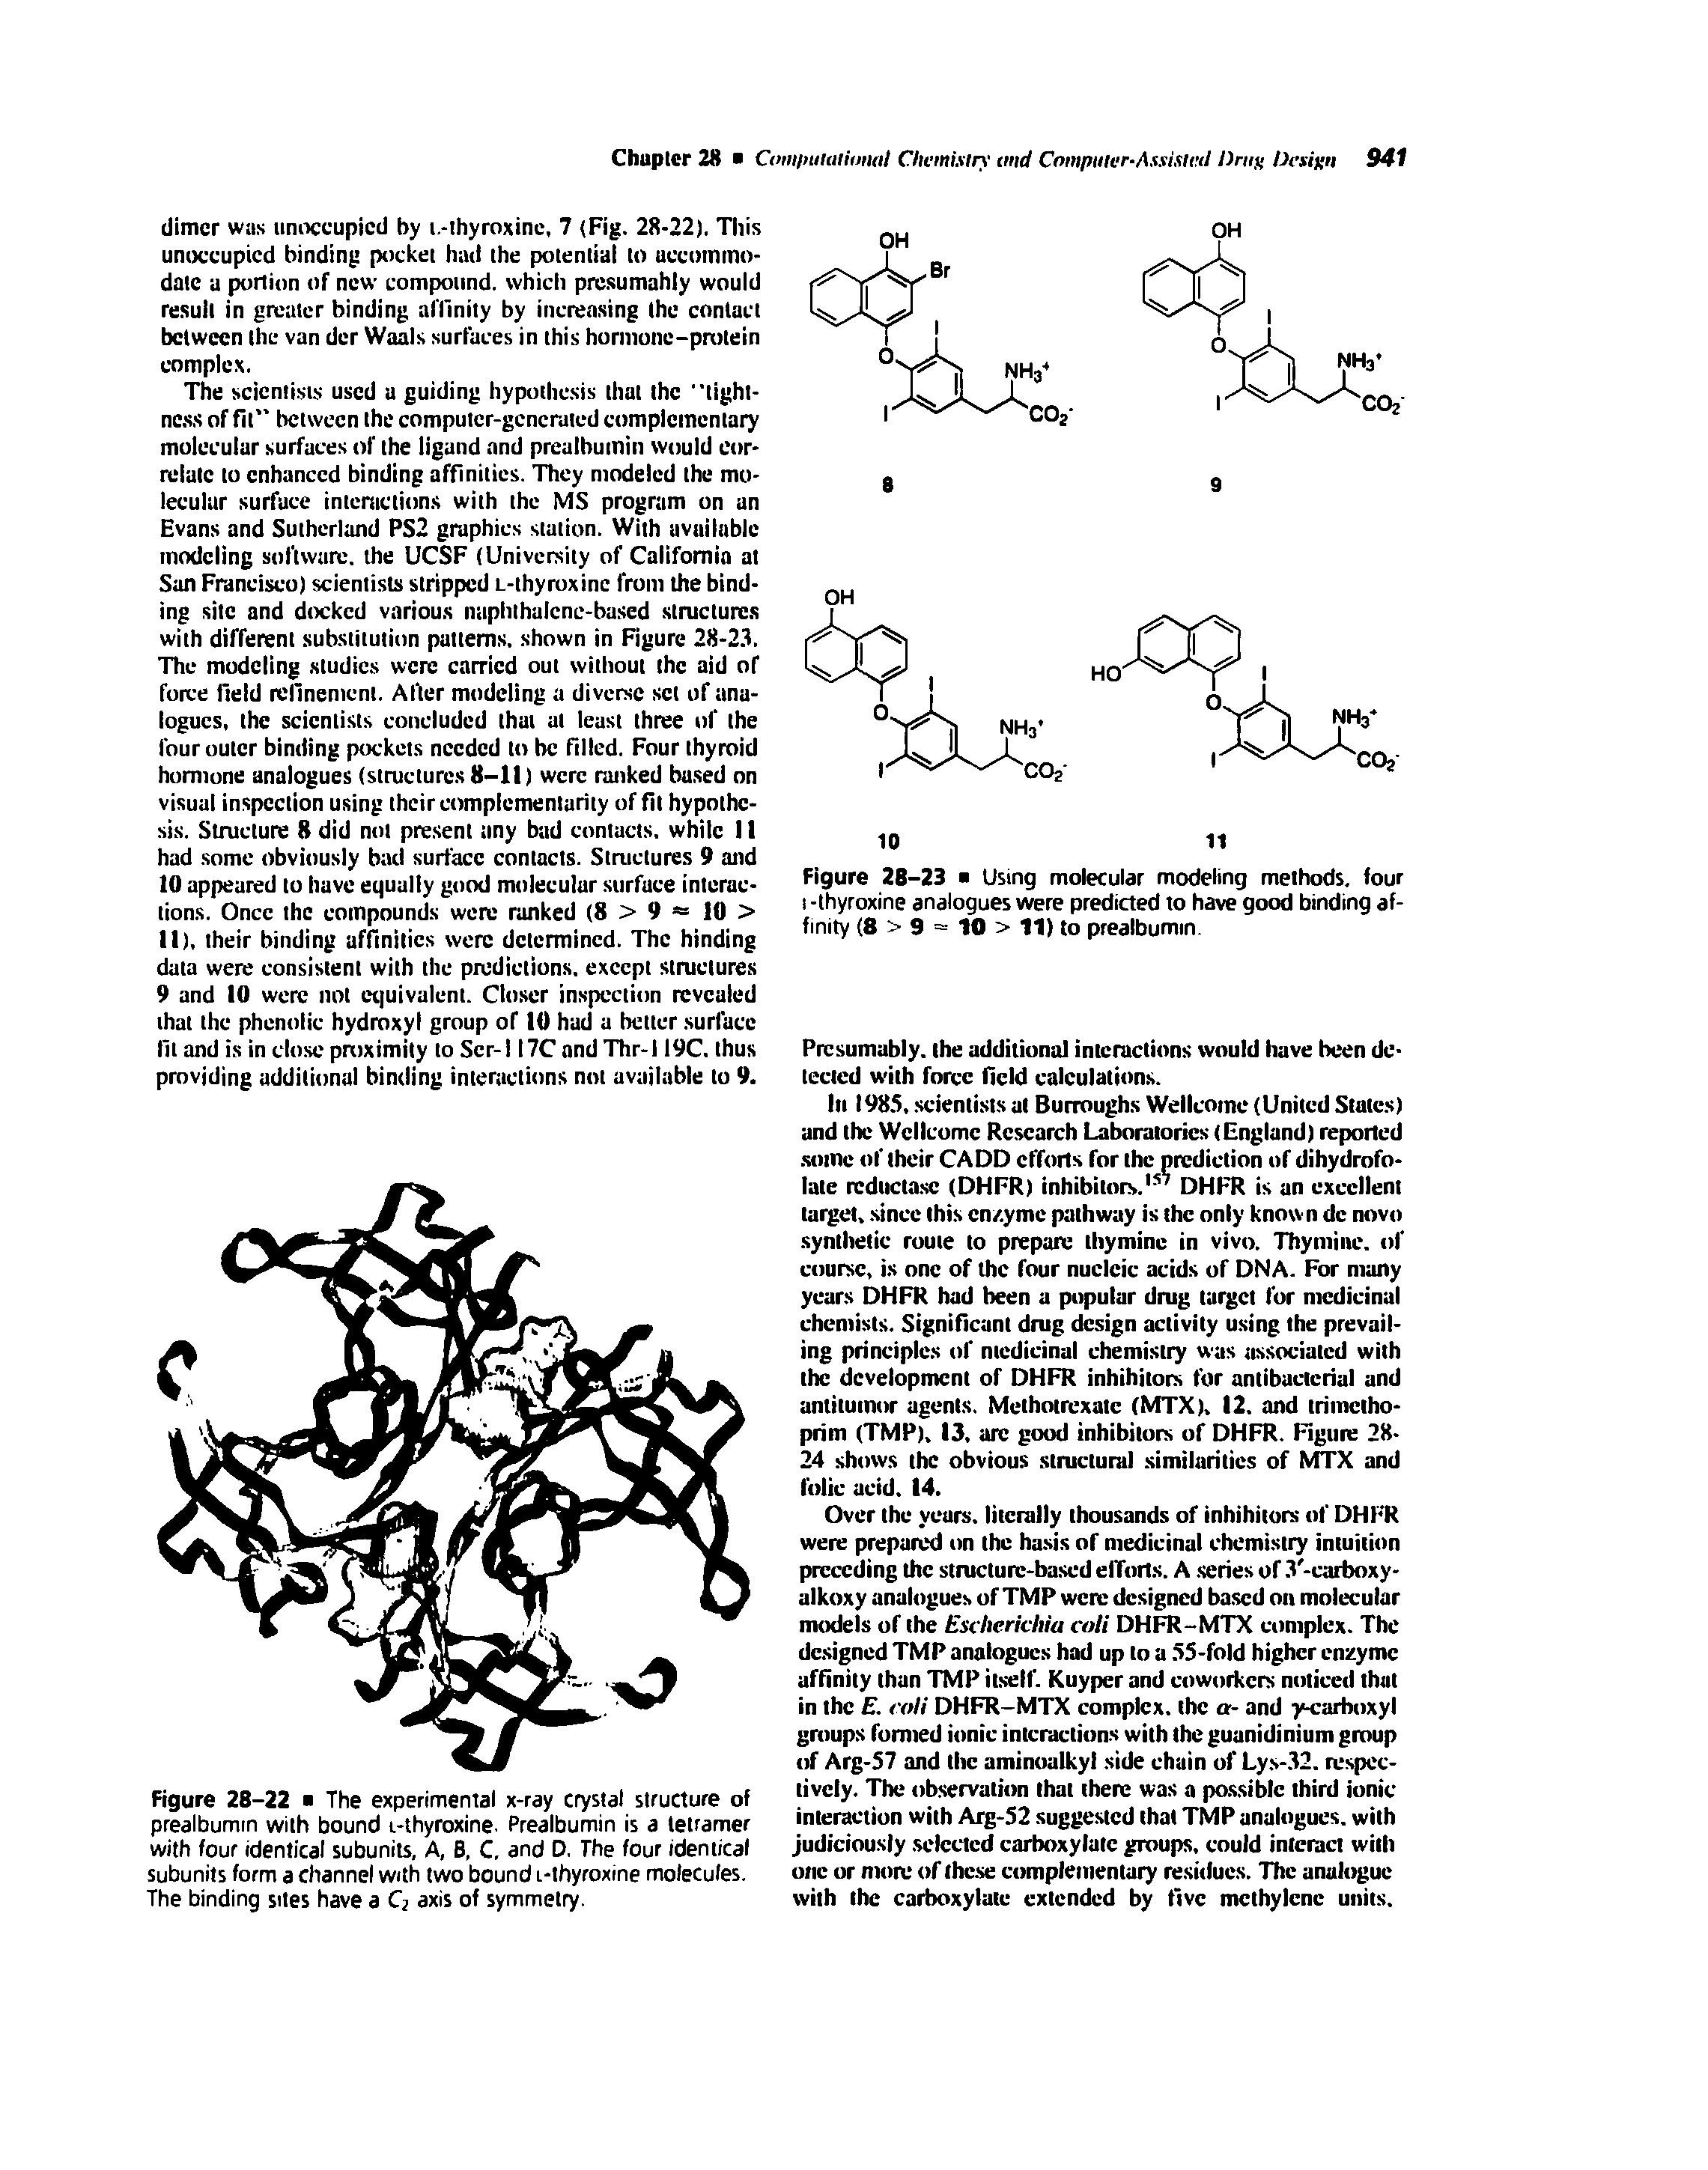 Figure 28-23 Using molecular modeling methods, four I -thyroxine analogues were predicted to have good binding affinity (8 > 9 = 10 > 11) to prealbumin.